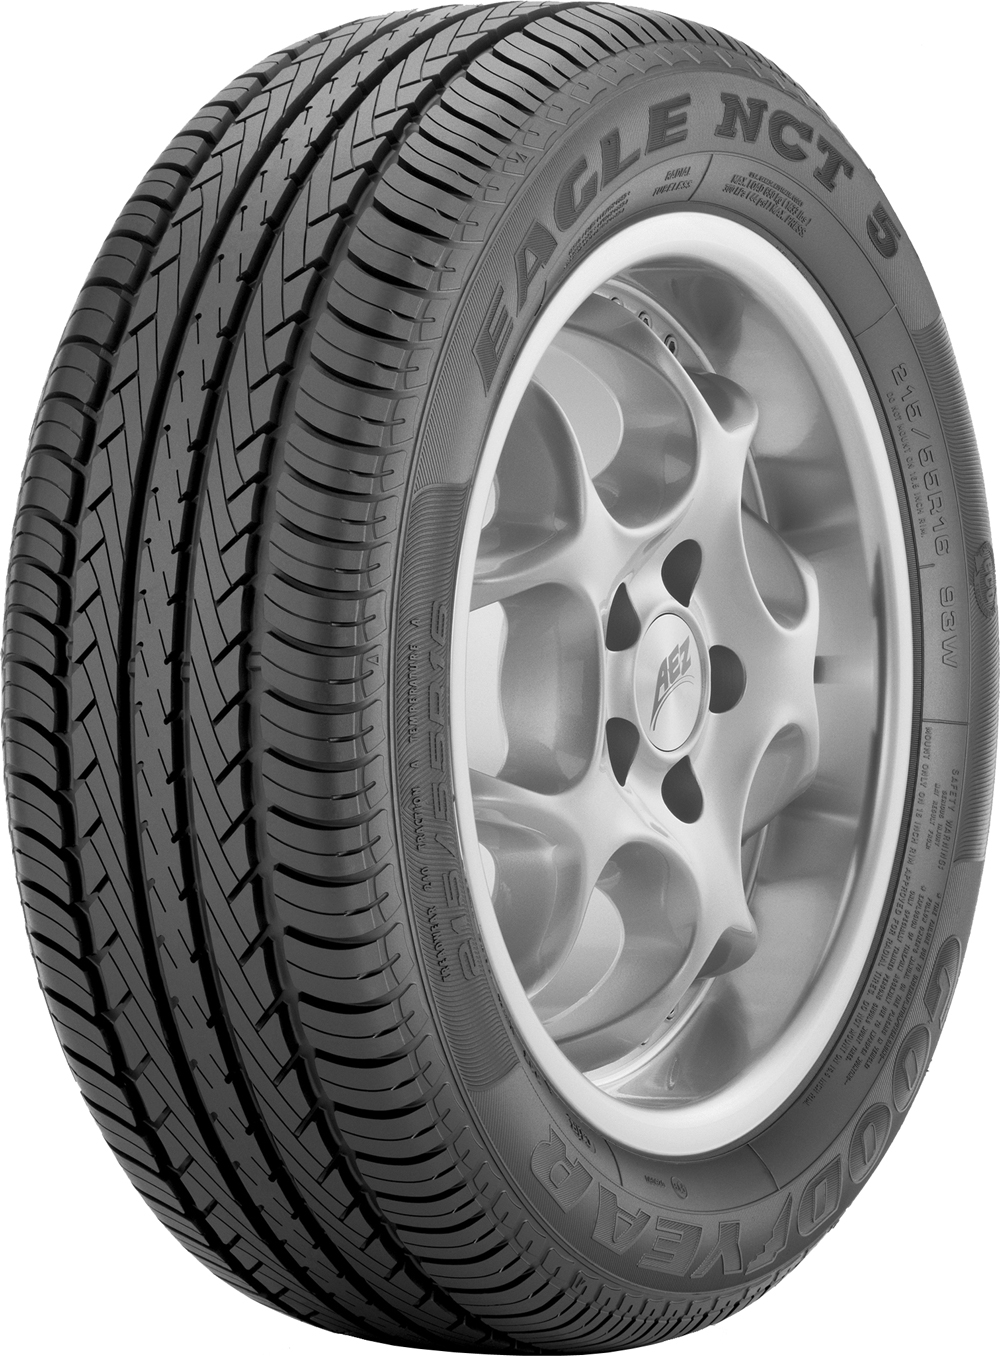 Anvelope auto GOODYEAR EAGLE NCT5 RFT BMW FP 285/45 R21 109